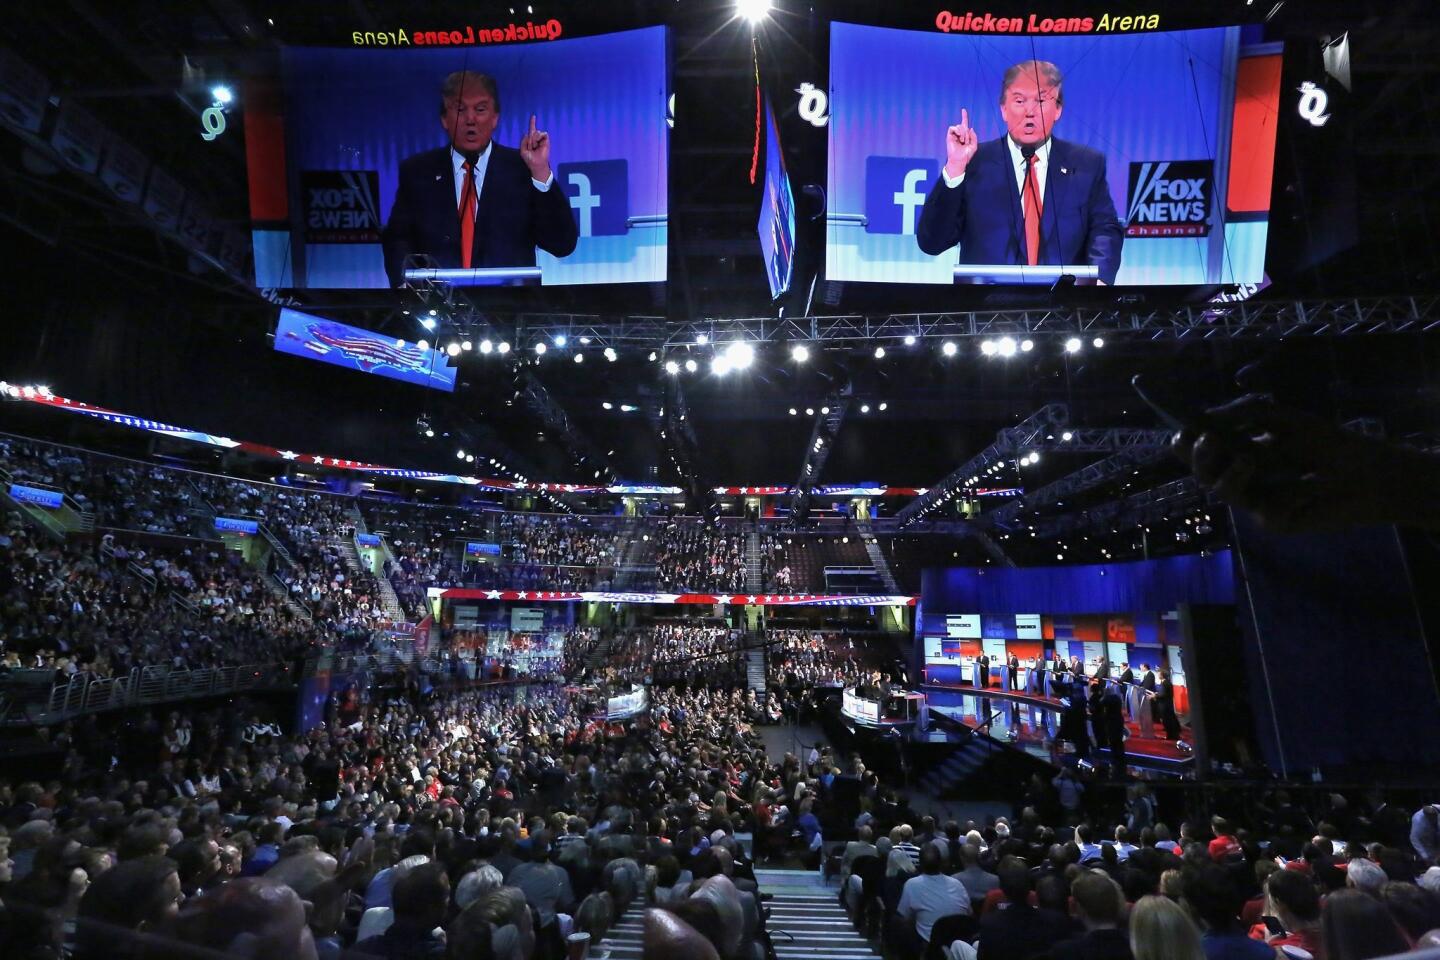 Donald Trump appears on a video screen above the crowd at Quicken Loans Arena in Cleveland.